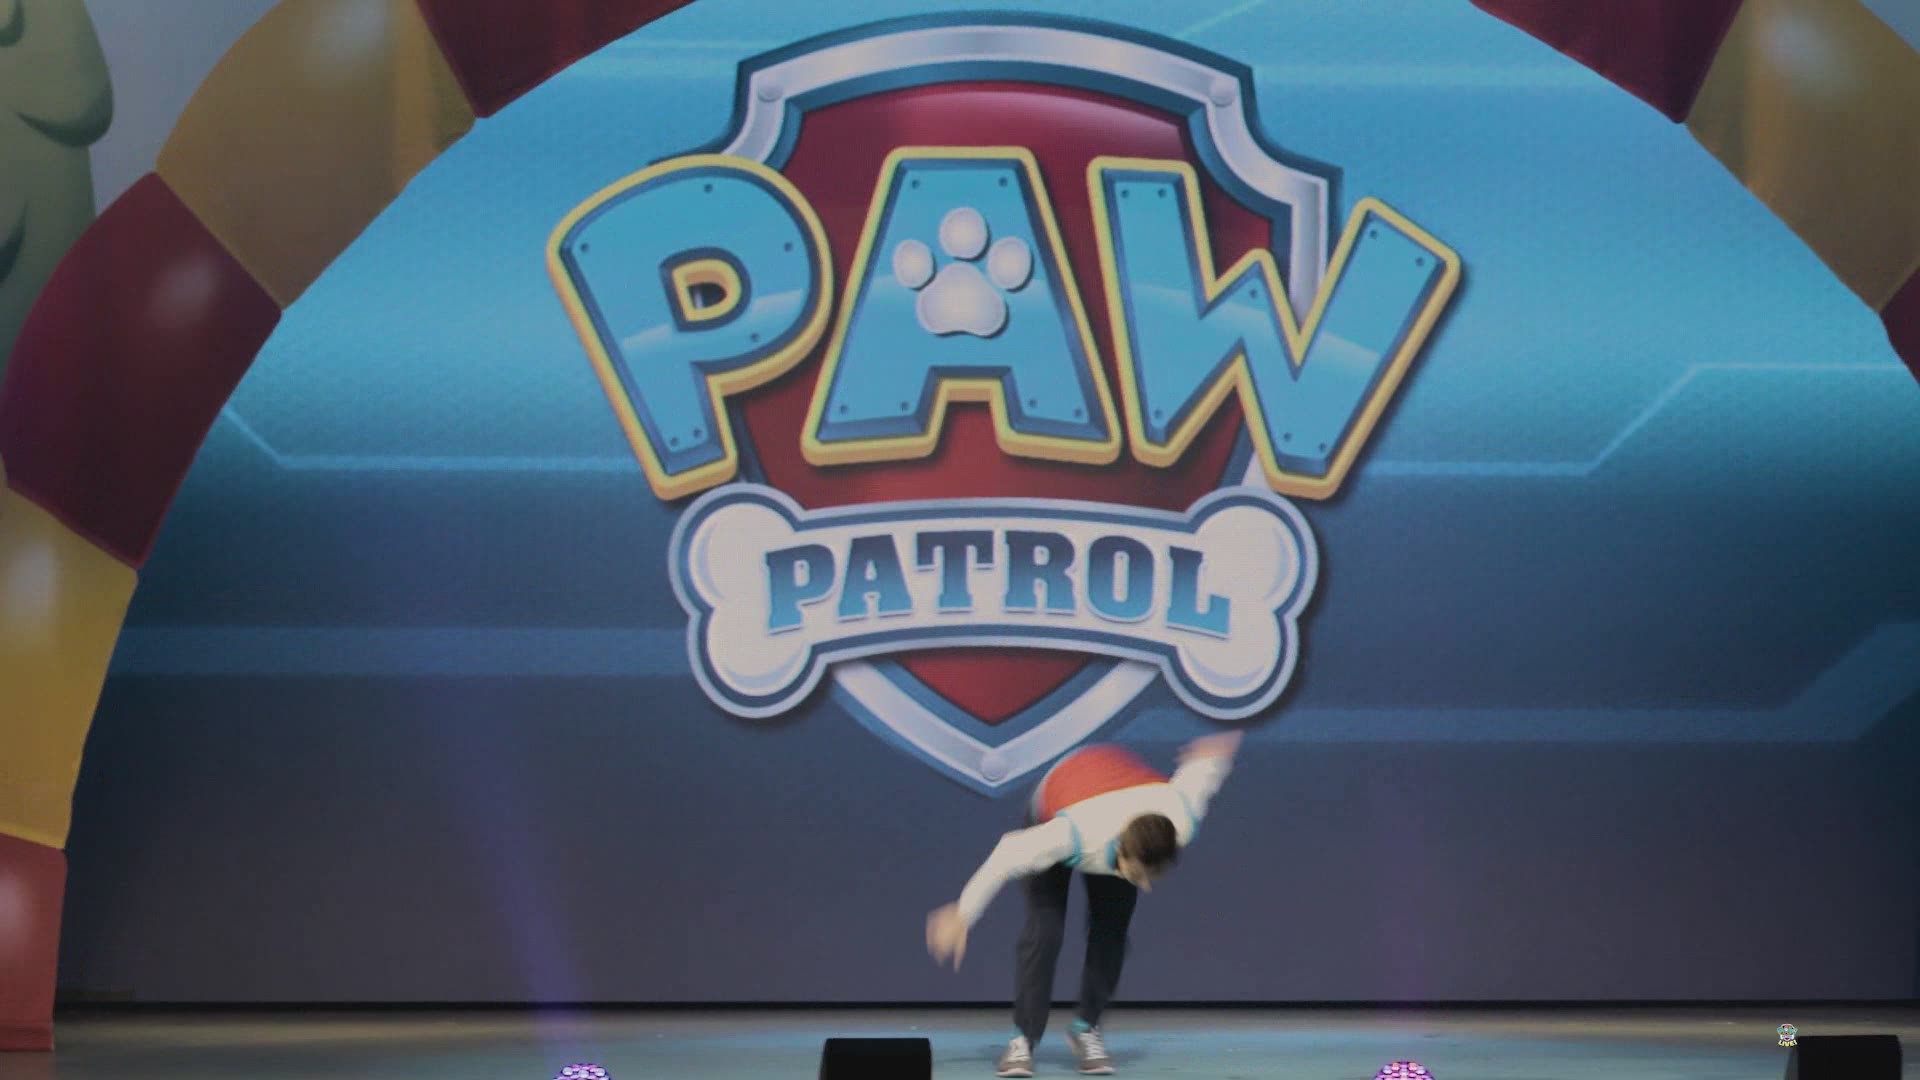 PAW Patrol Live! is coming to Cleveland